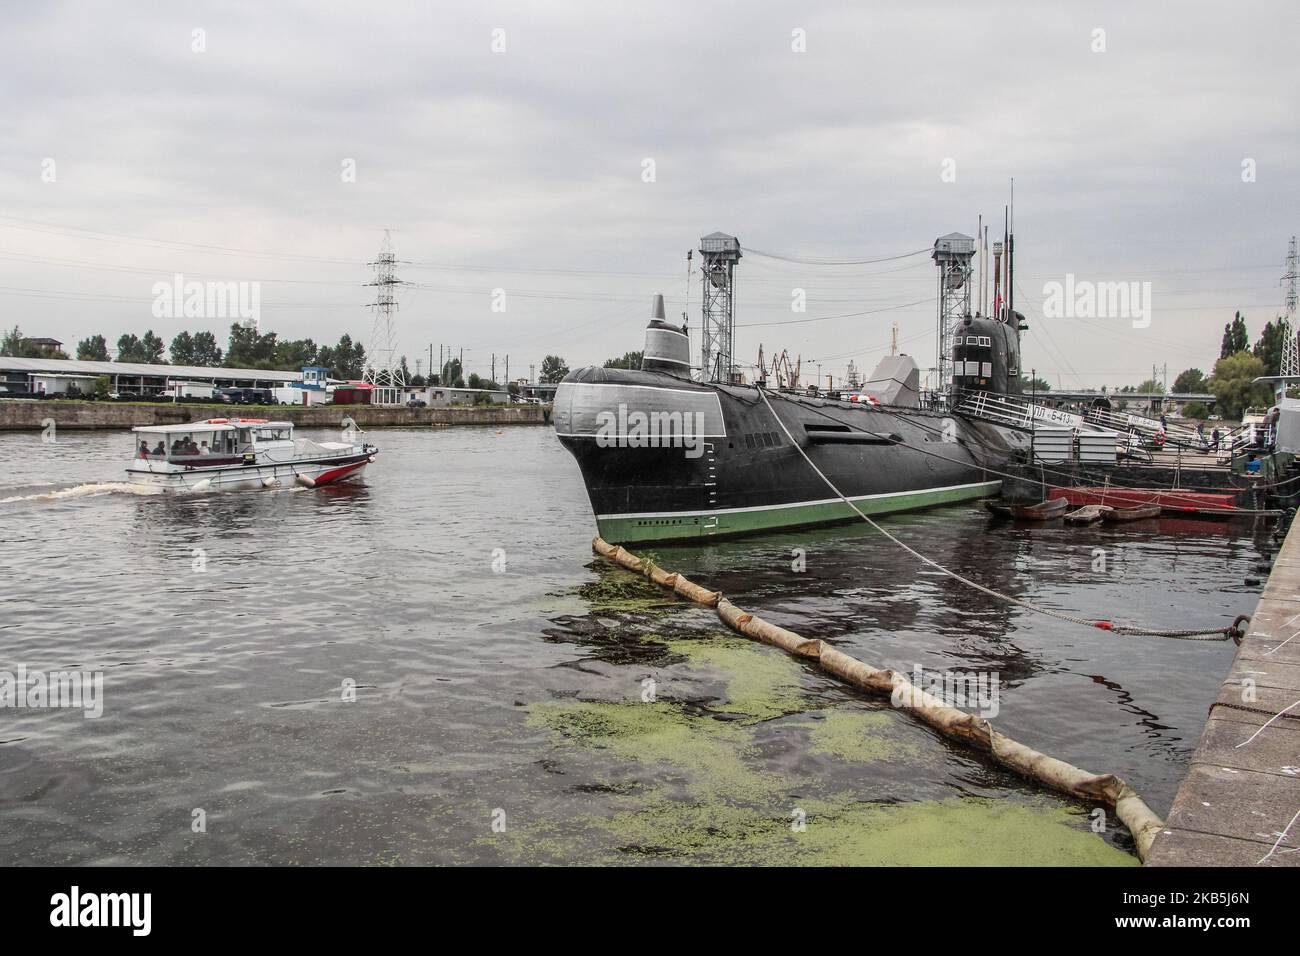 Submarine B-413 (NATO Foxtrot) is seen in Museum of the World Ocean in Kaliningrad, Russia, on 7 September 2019 Launched in 1968 from a slipway in Leningrad patrolled within the 4th submarine squadron of the Red Banner Northern Fleet between 1969 and 1990. It is 90 m long, armed with 22 torpedoes and capable of staying submerged for up to 5 days, played a massive role in the Cold War between the USSR and the US. (Photo by Michal Fludra/NurPhoto) Stock Photo